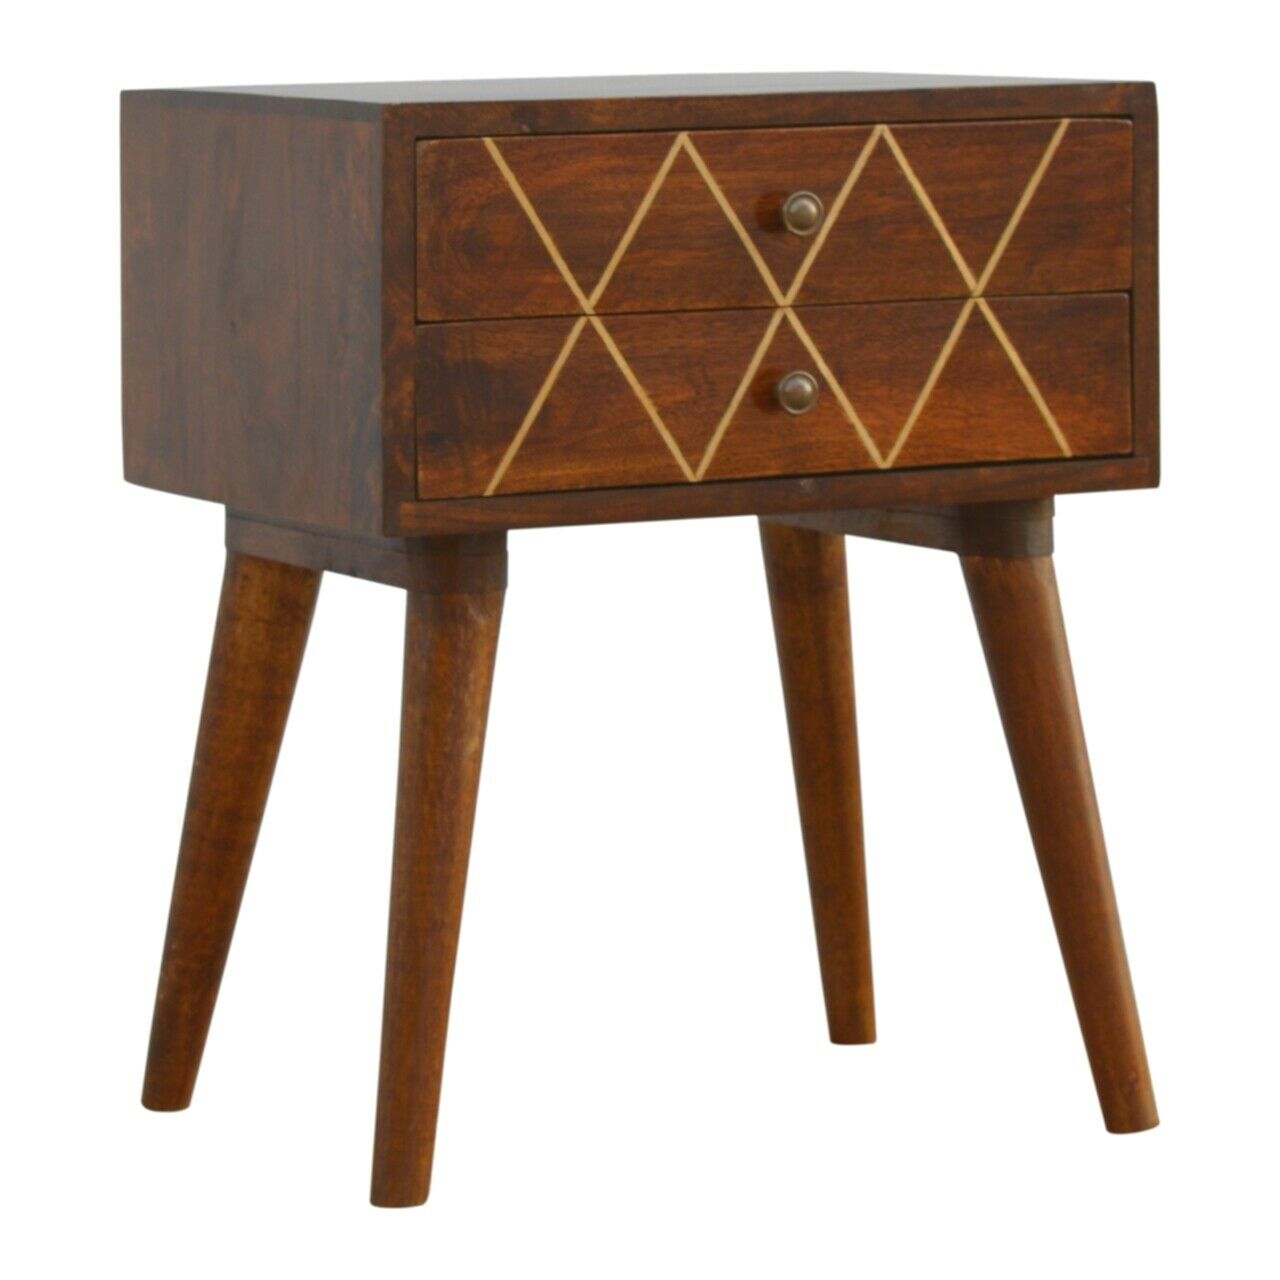 Solid Wood Chestnut Side Table with Gold Detailing